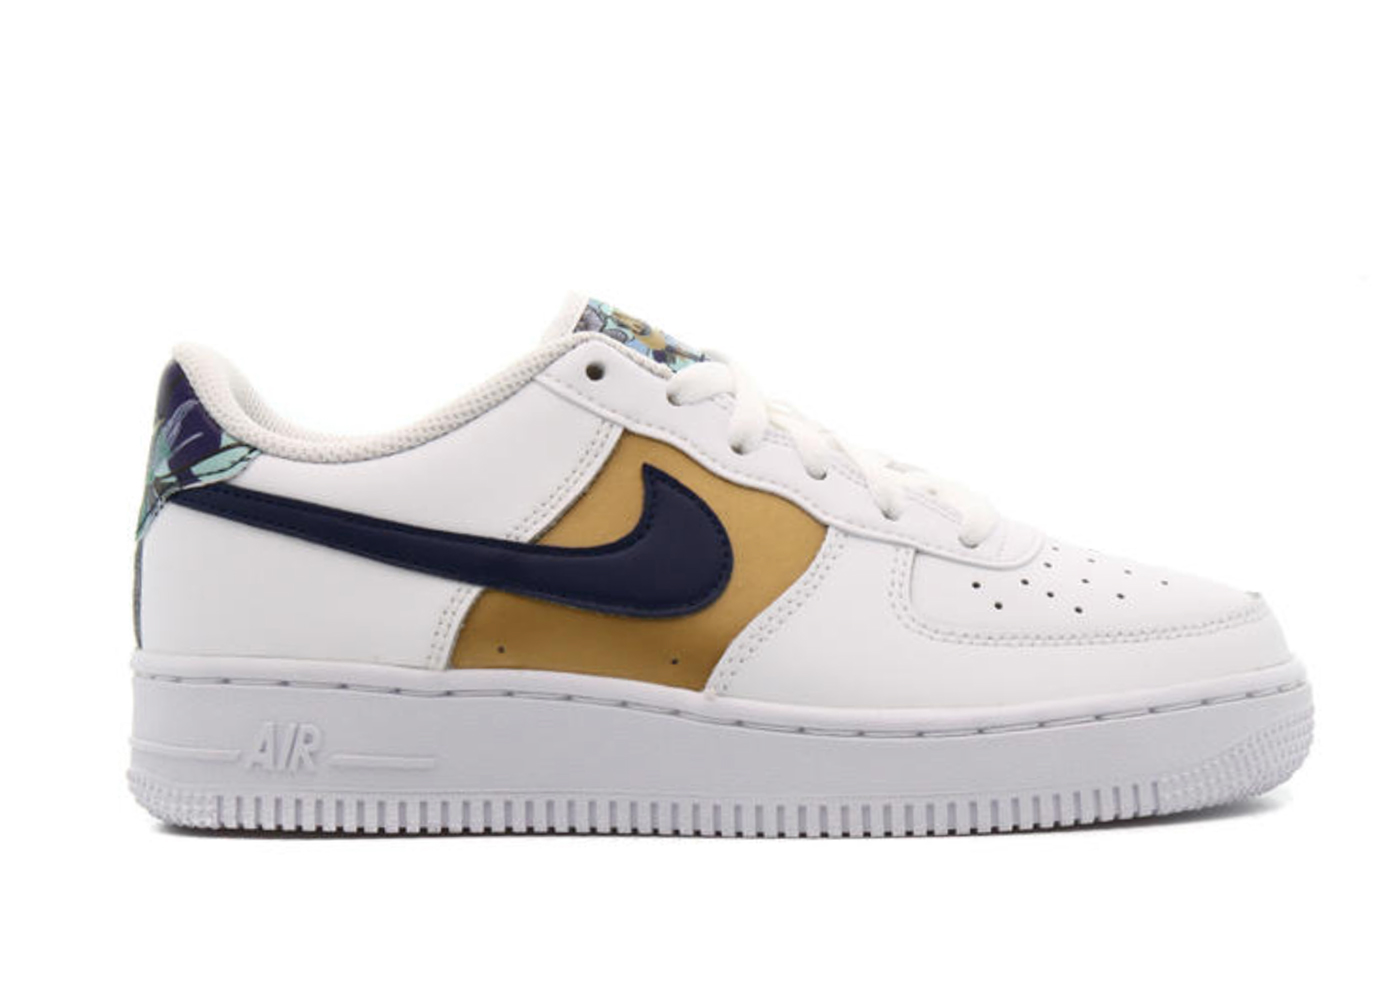 Nike Air Force 1 Low '07 LV8 White Blue Void Metallic Gold (GS 